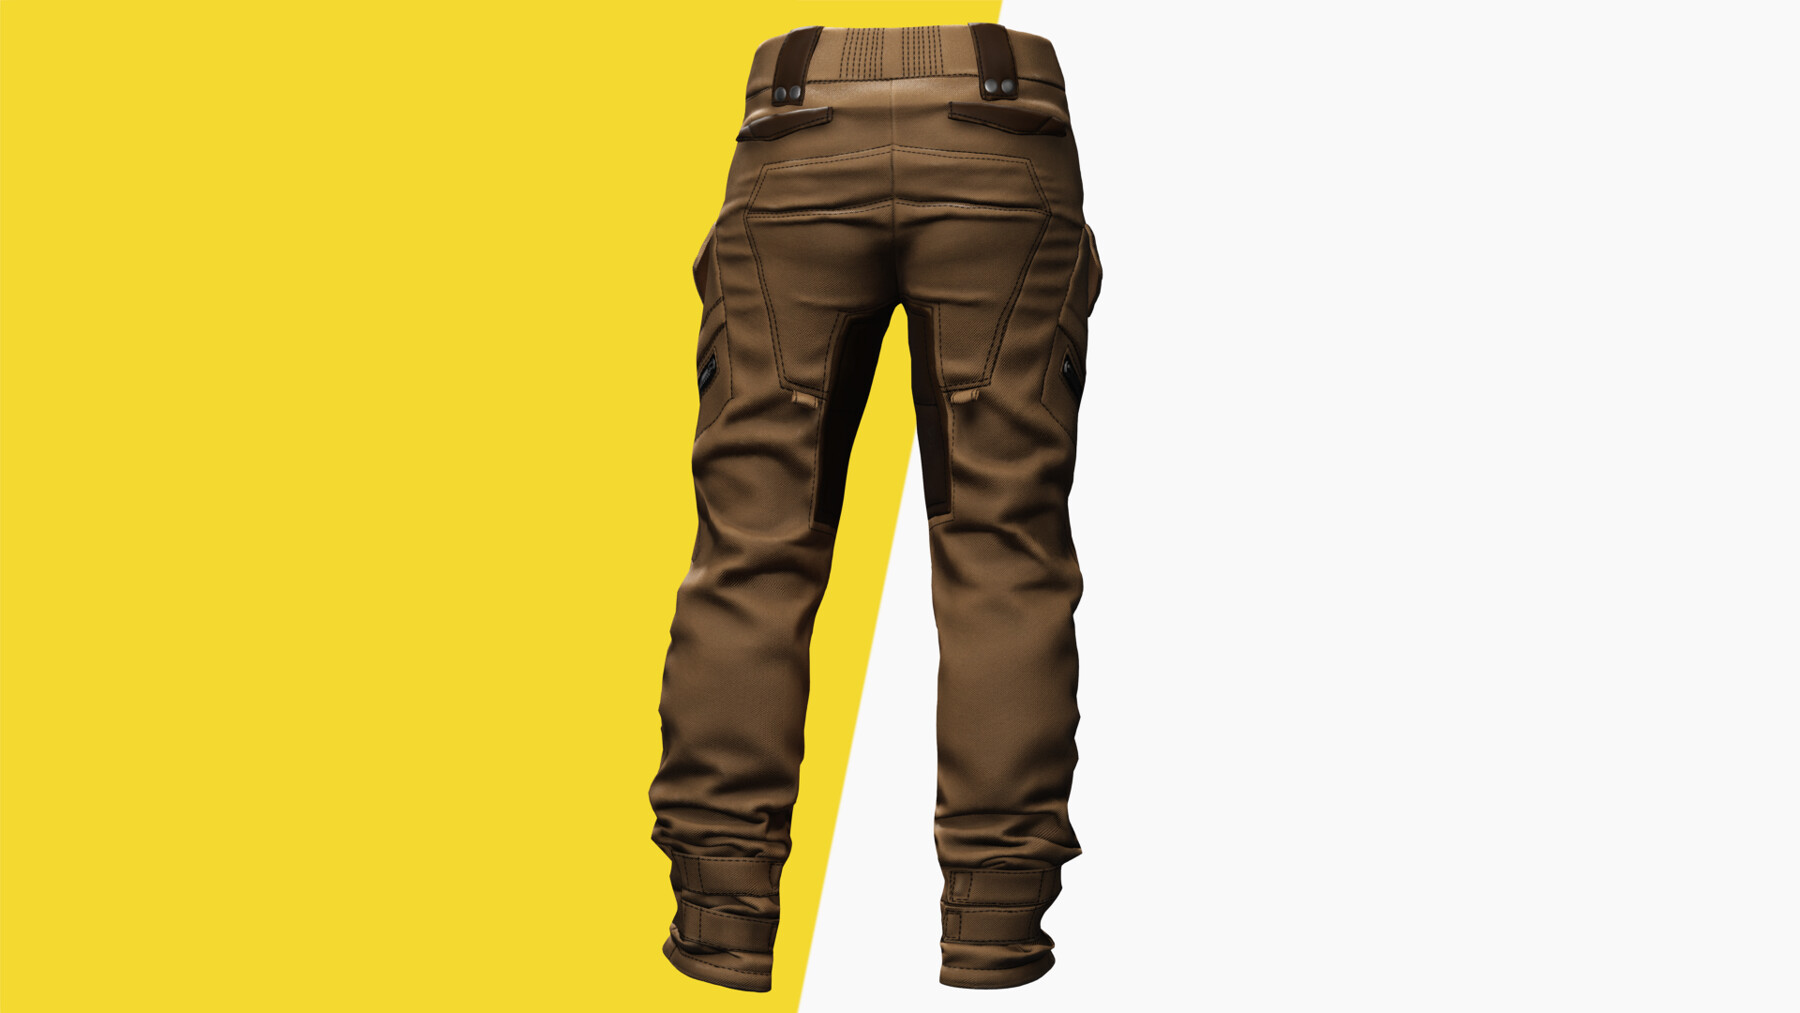 ArtStation - Realistic Pants 1 for Men Rigged Low-poly 3D model | Game ...